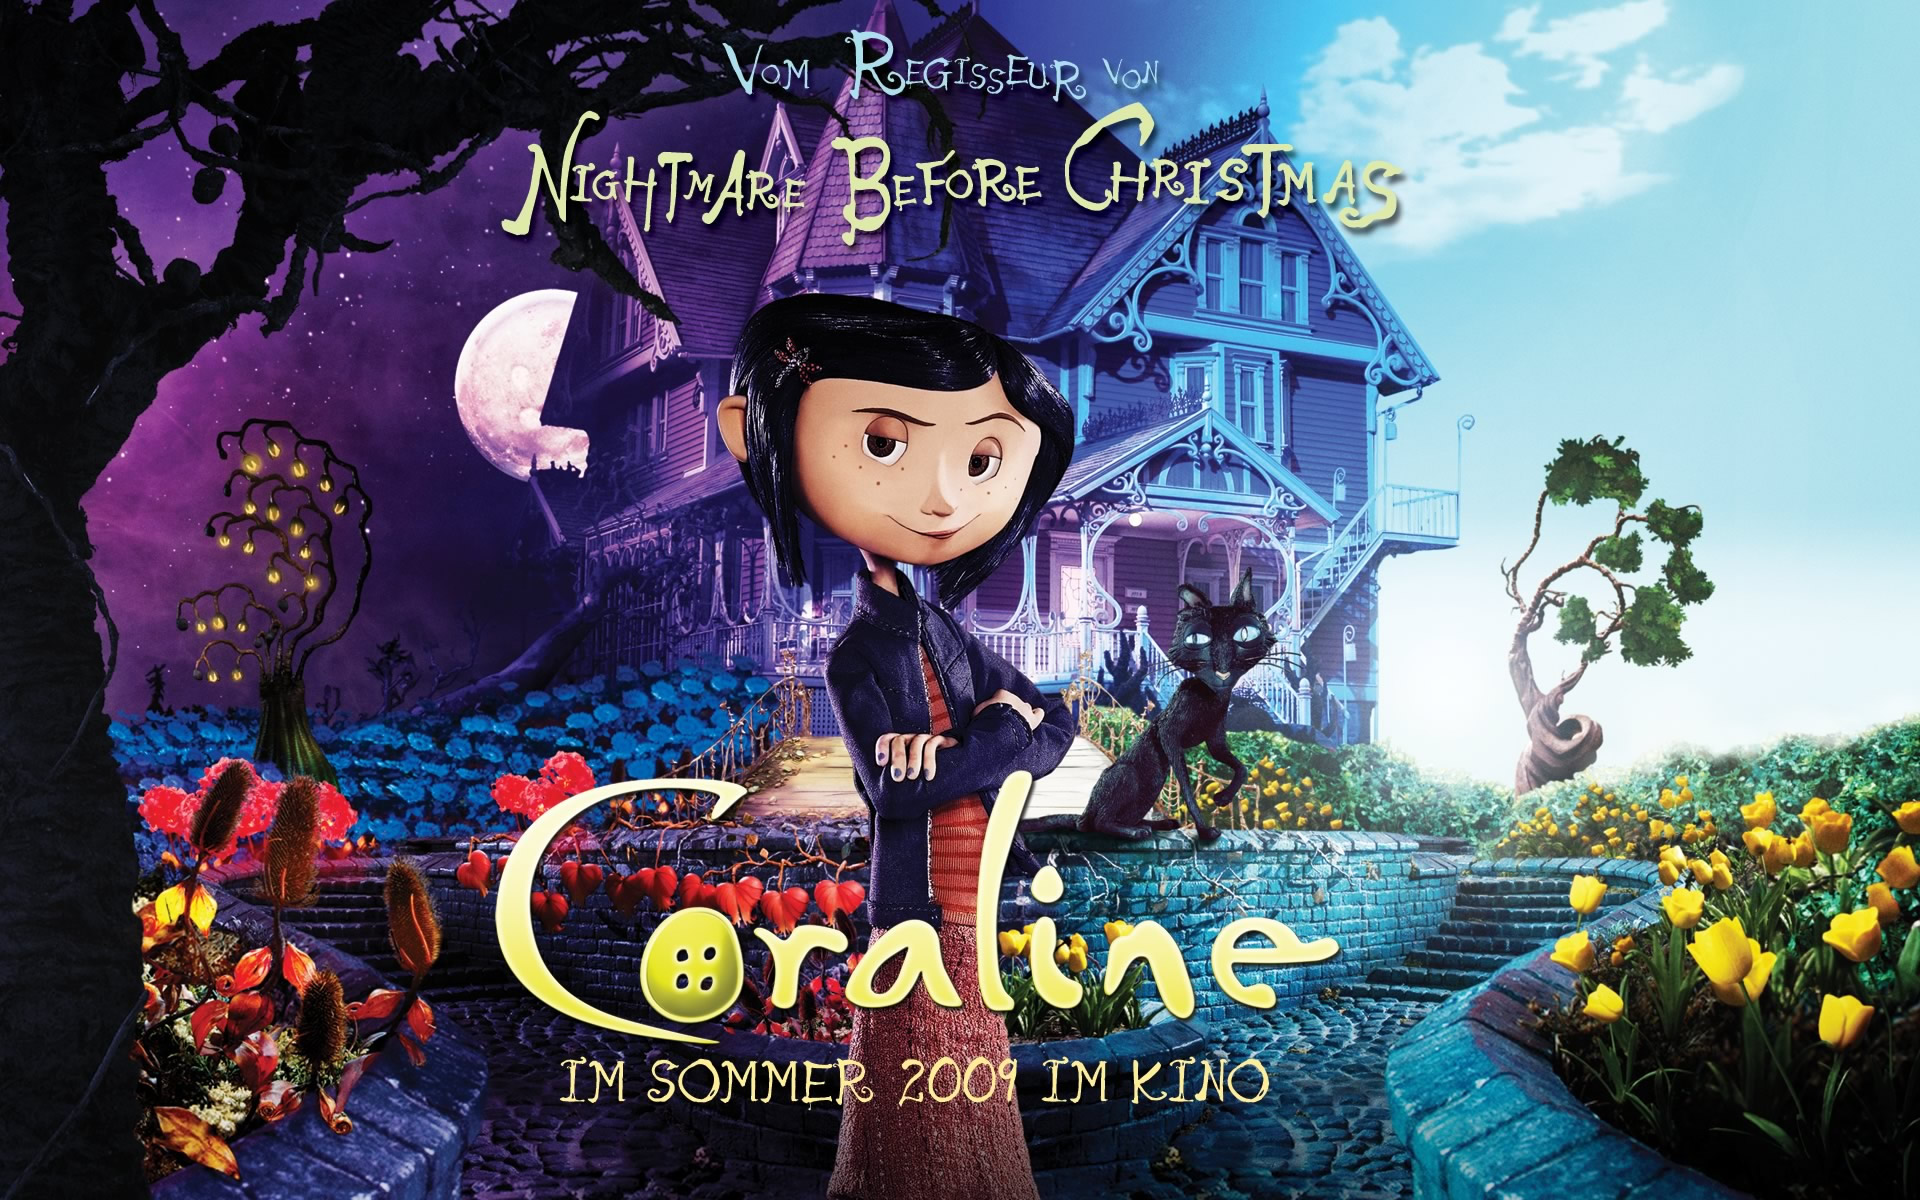 825x1092px Coraline 148.96 KB 11.09.2015 By Ronin